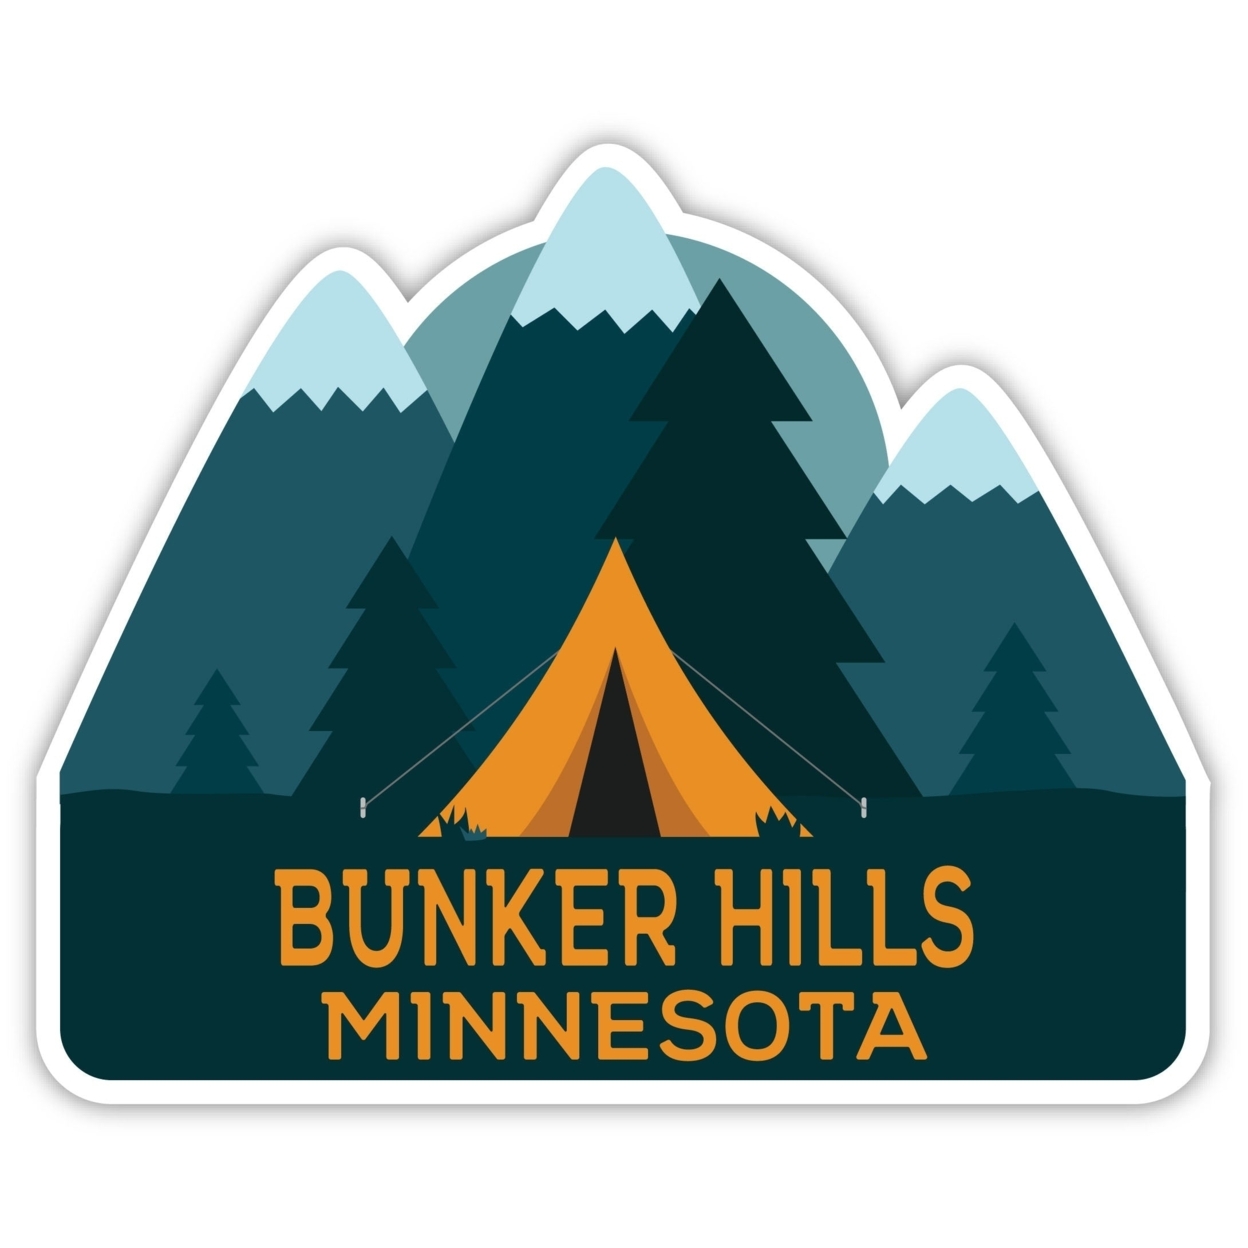 Bunker Hills Minnesota Souvenir Decorative Stickers (Choose Theme And Size) - 4-Pack, 10-Inch, Tent